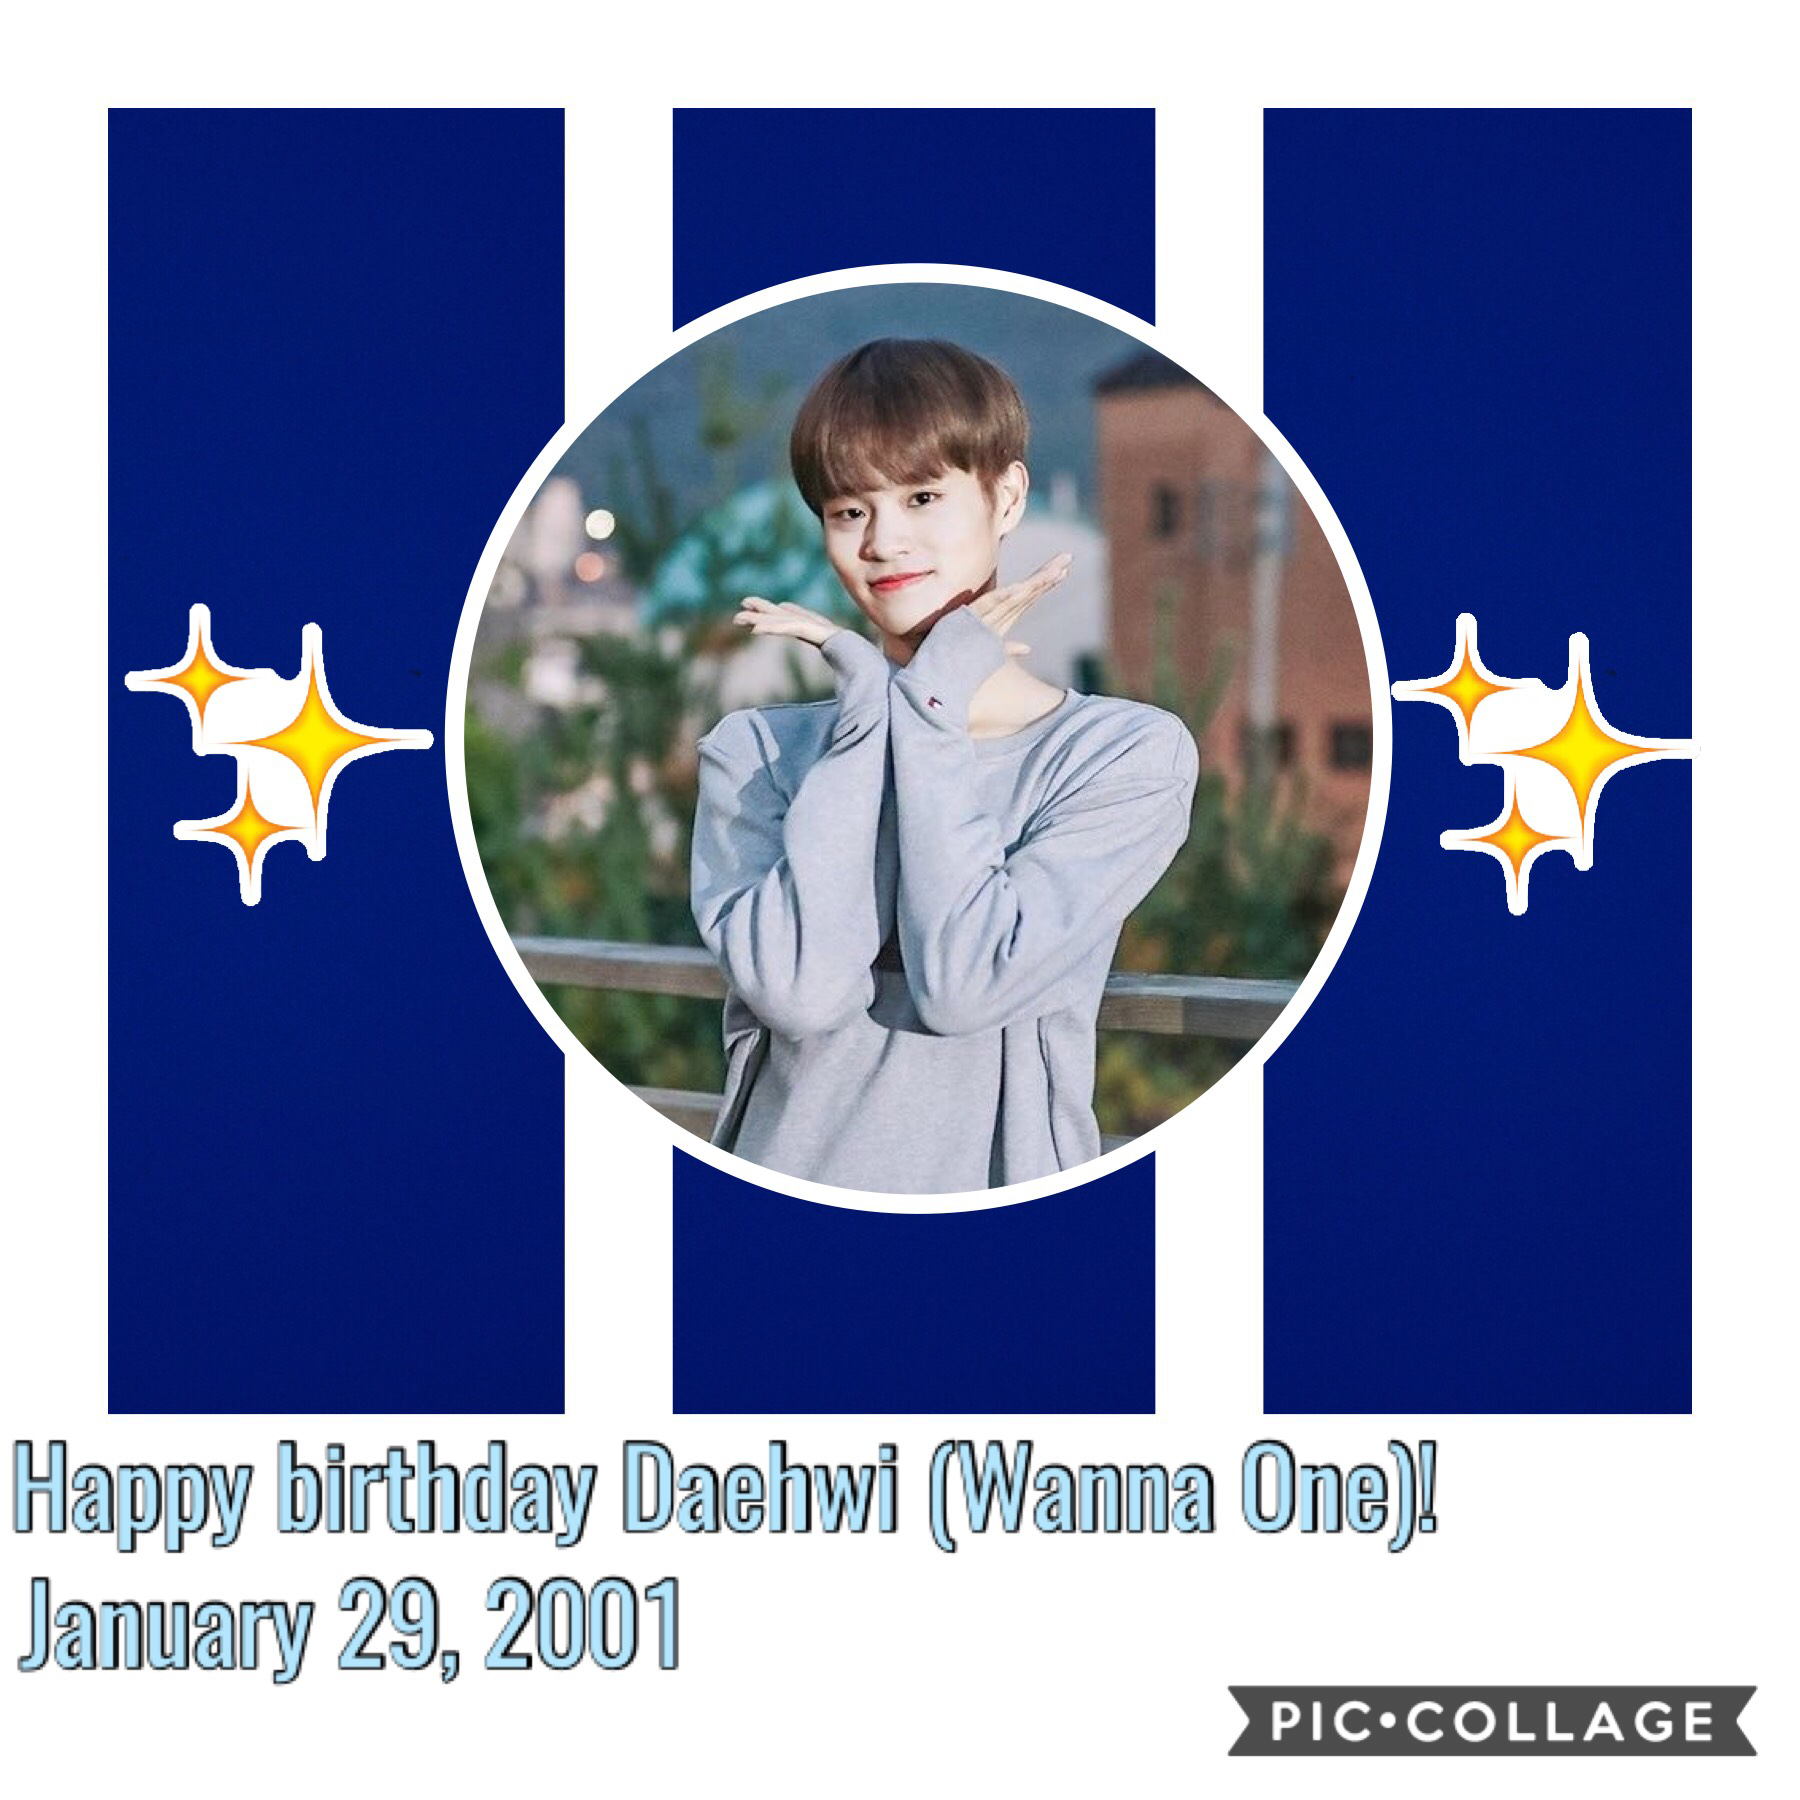 •Lee Daehwi•
Happy birthday ❤️❤️❤️ Little uwu boy we must protect lol!
I hope he has a great career ahead of him, he’s so talented~ Even though I’ll miss Wanna One, I can’t wait to see what’s down the road!! 